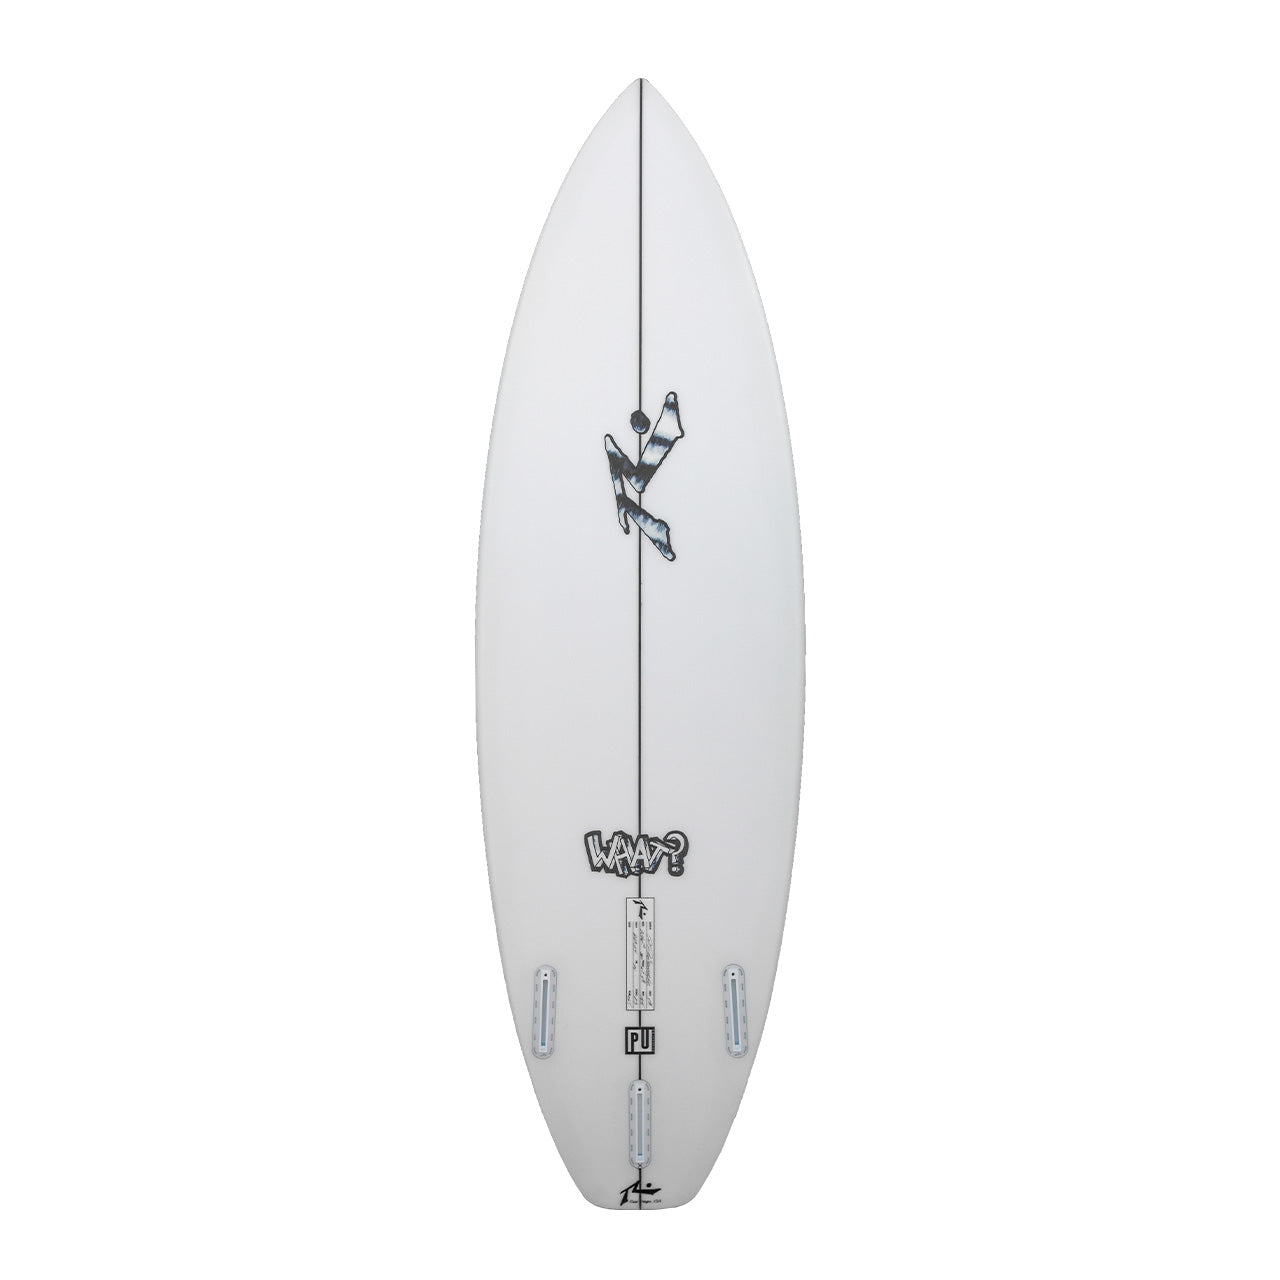 The What - High Performance Shortboard - Rusty Surfboards - Top View